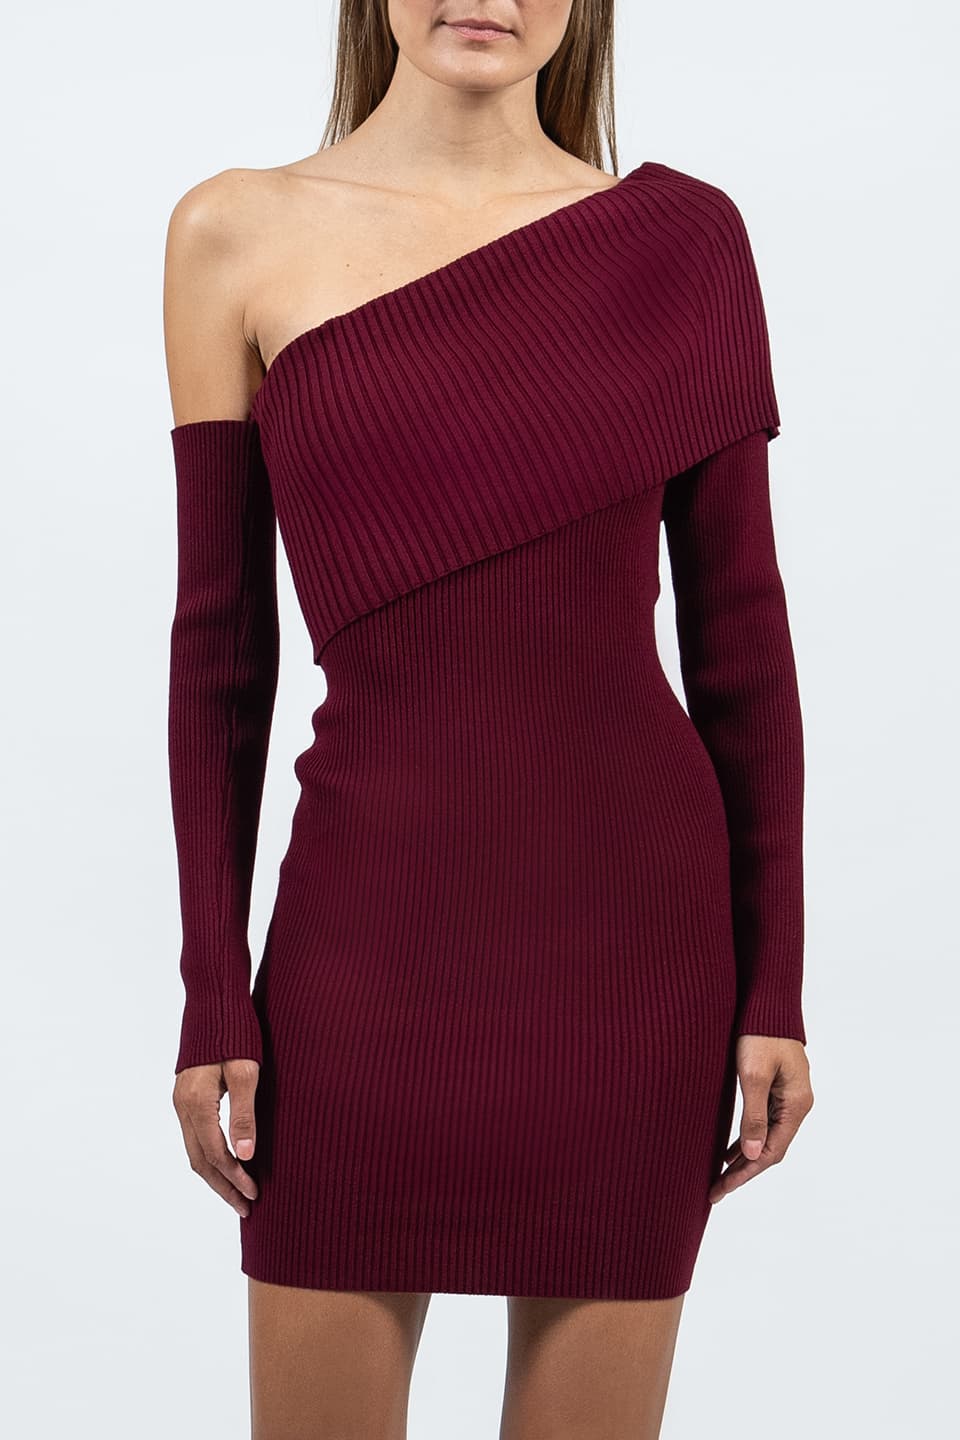 Thumbnail for Product gallery 7, Burgundy One Sided Knit Dress